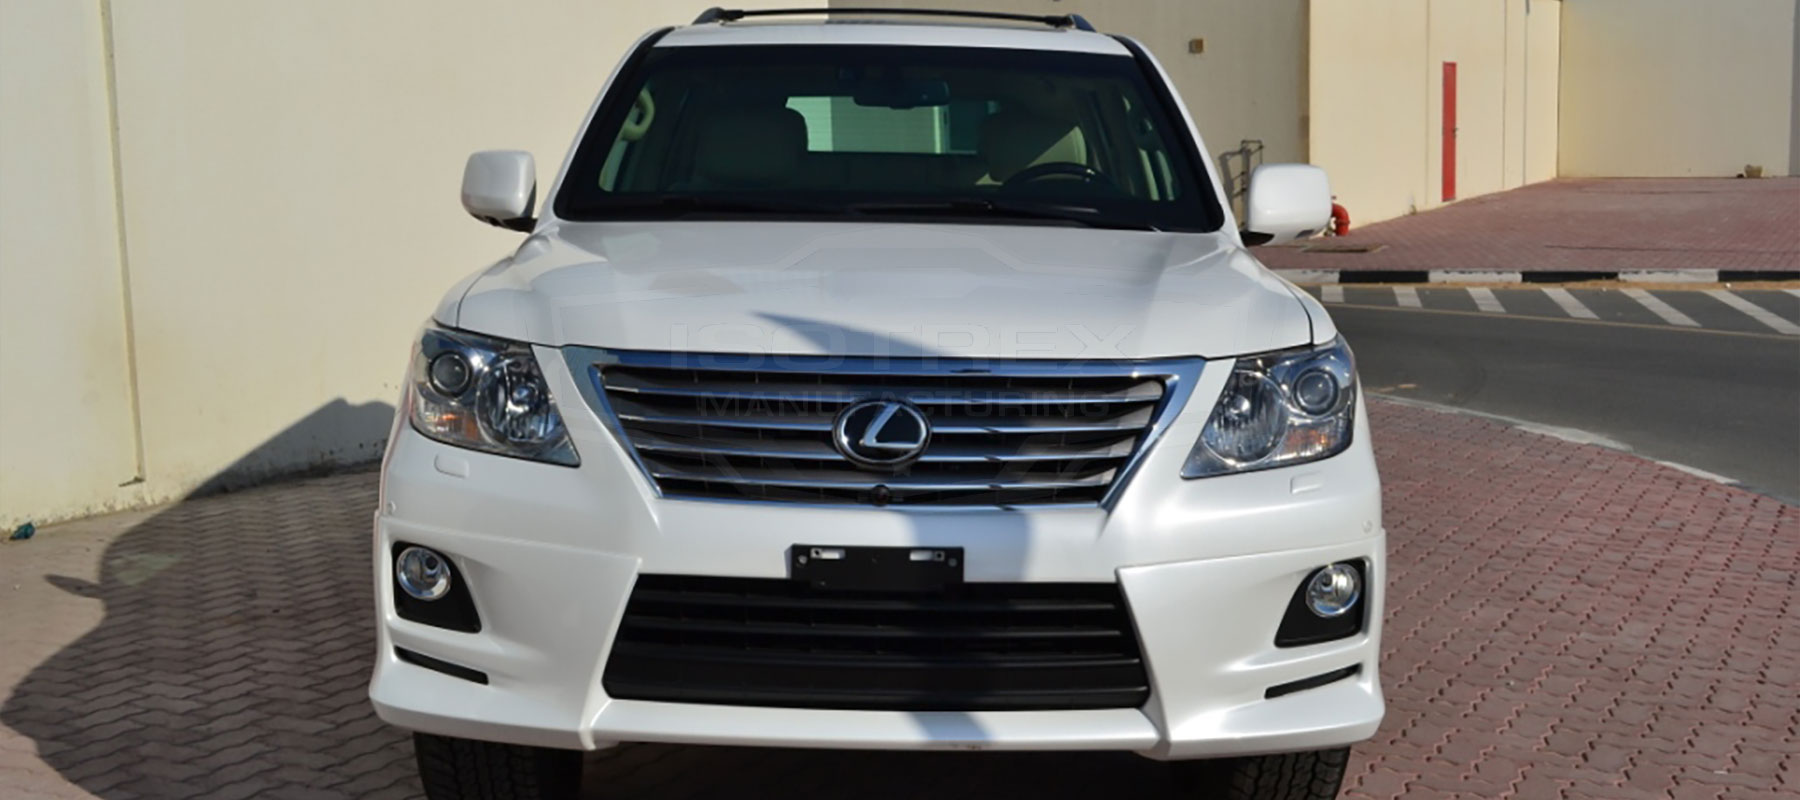 Armored Lexus LX-570 by Isotrex Manufacturing